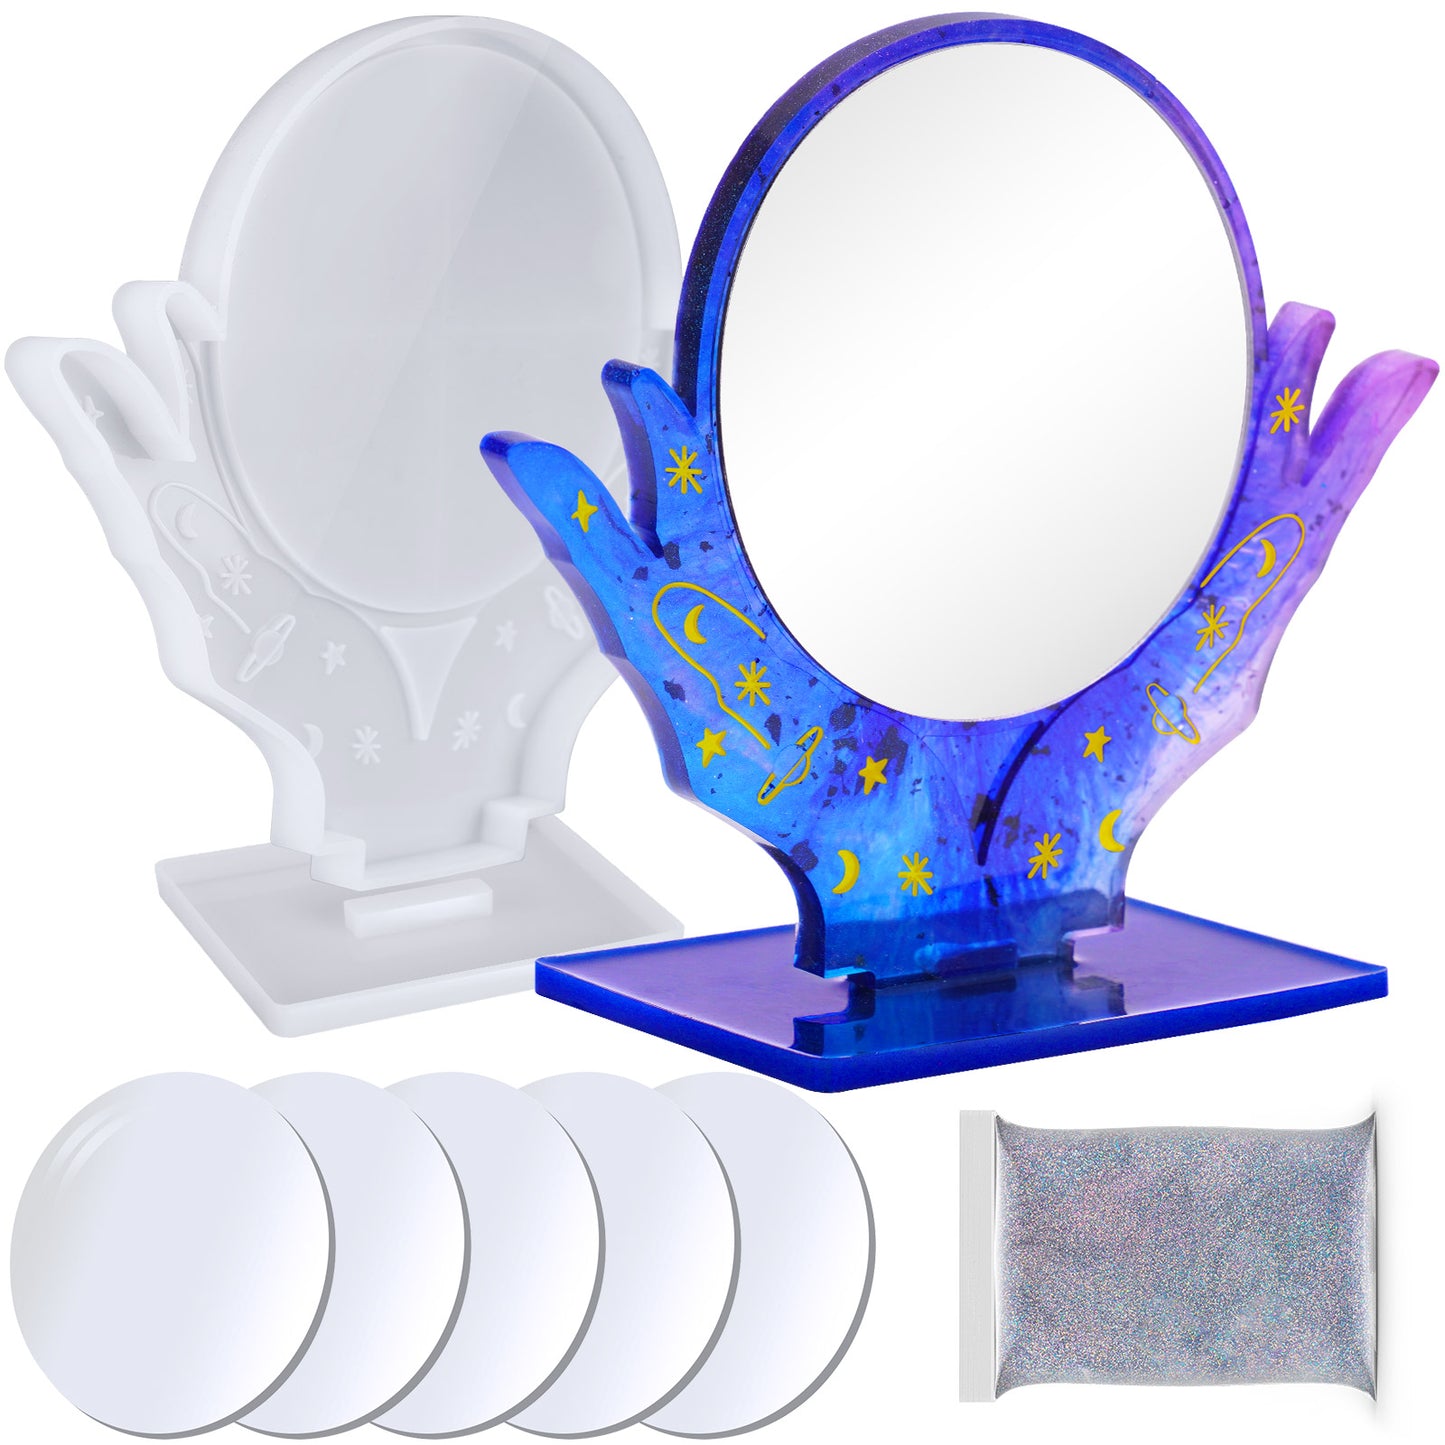 Makeup Mirror Epoxy Resin Casting Kit 2x Crystal Hands Silicone Molds+5x 4" Sh